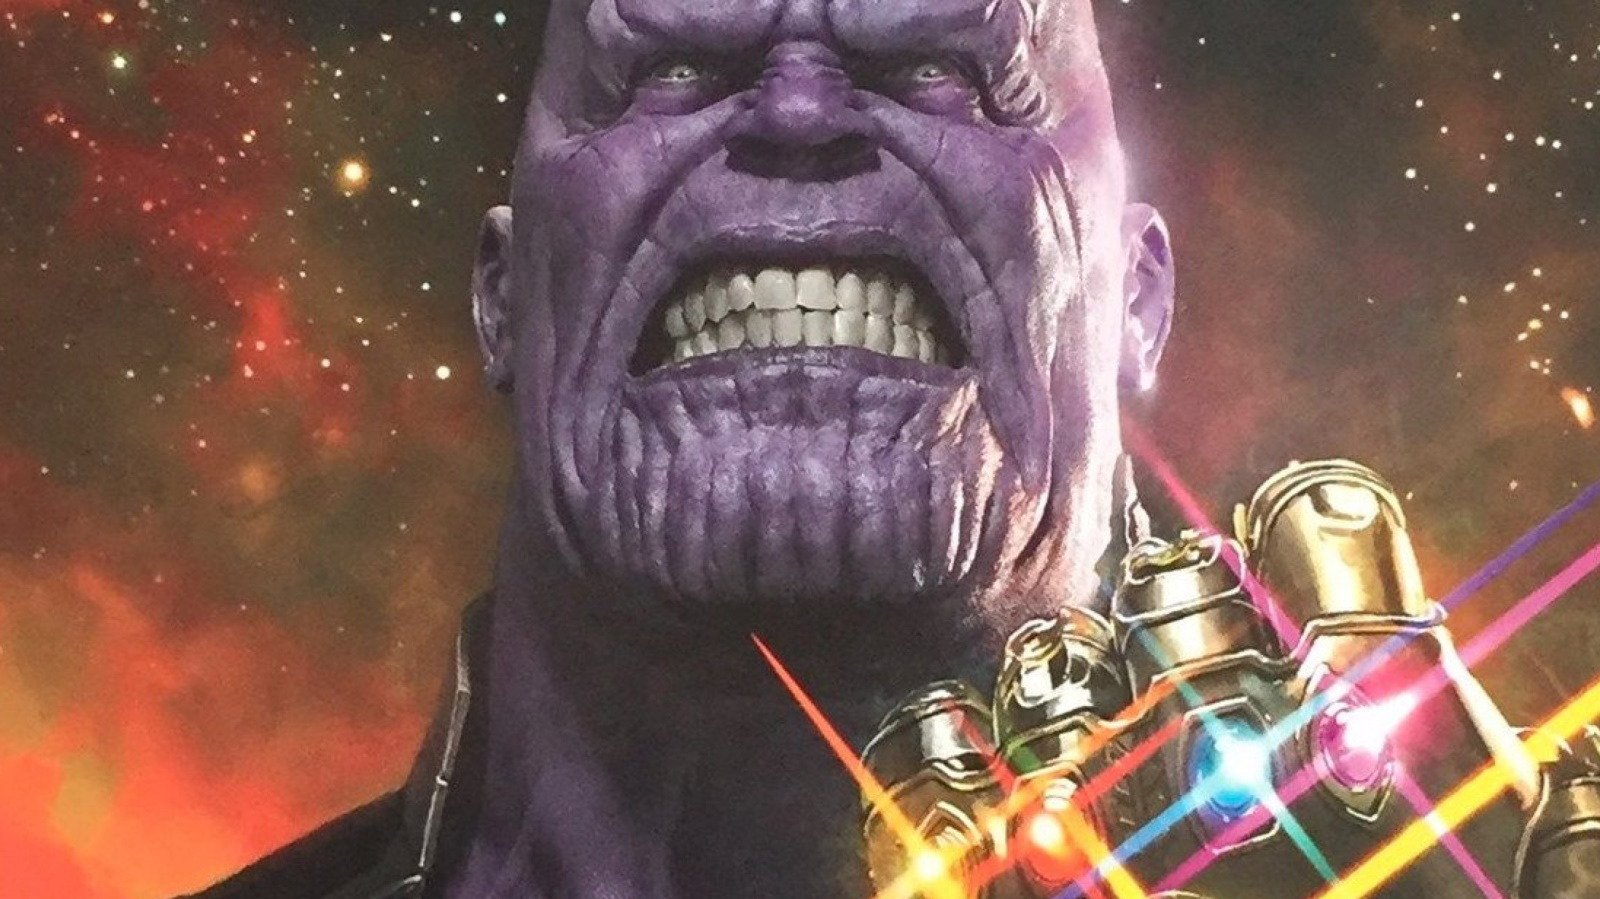 Fan Theories About Thanos' Snap That Make The MCU Scarier